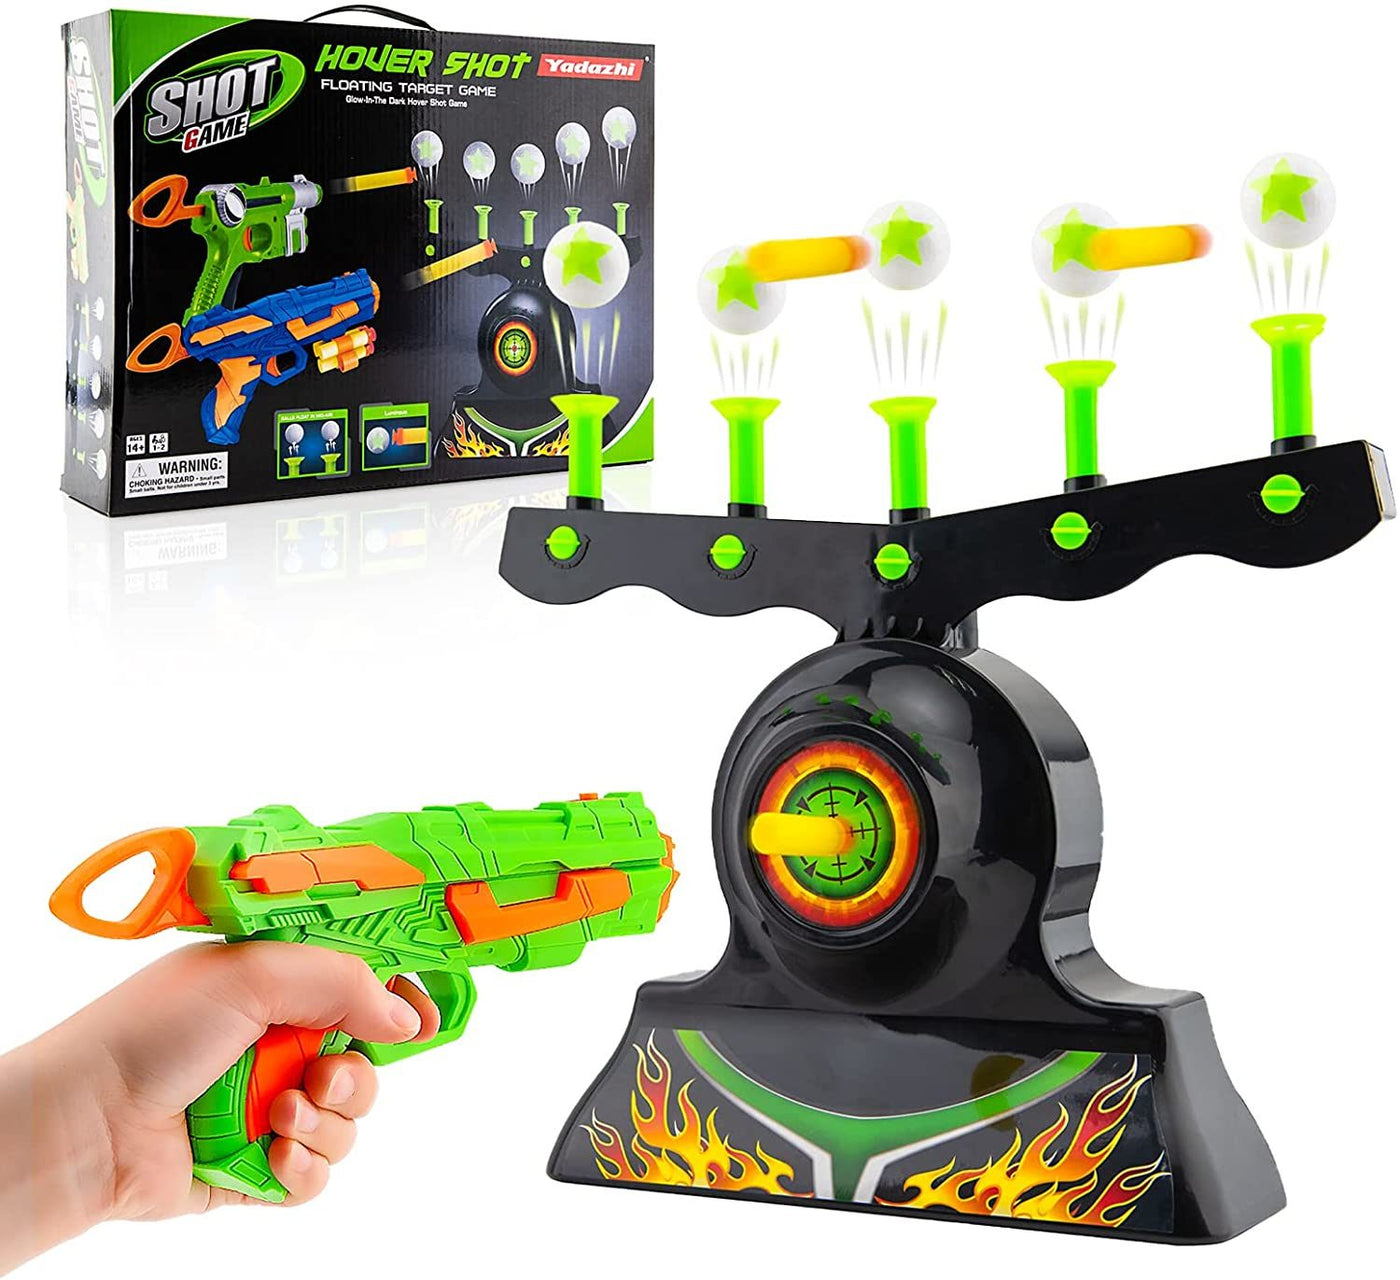 Hover Shot Shooting Target Game with Nerf Guns